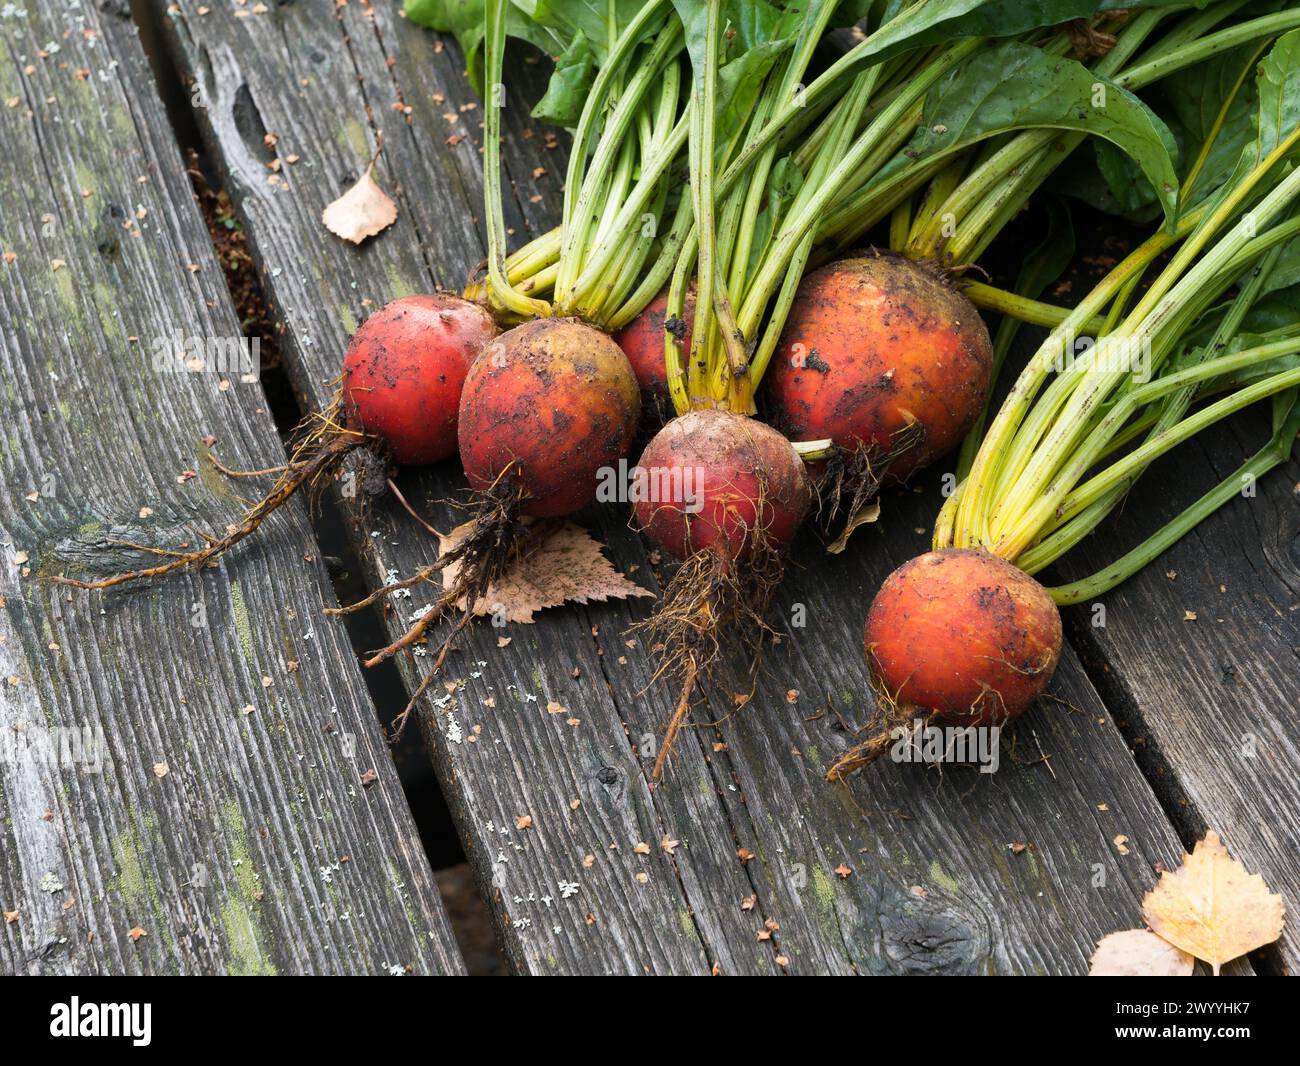 Freshly picked yellow golden beet roots, nicely displayed on a wooden table made of old rustic material. Stock Photo